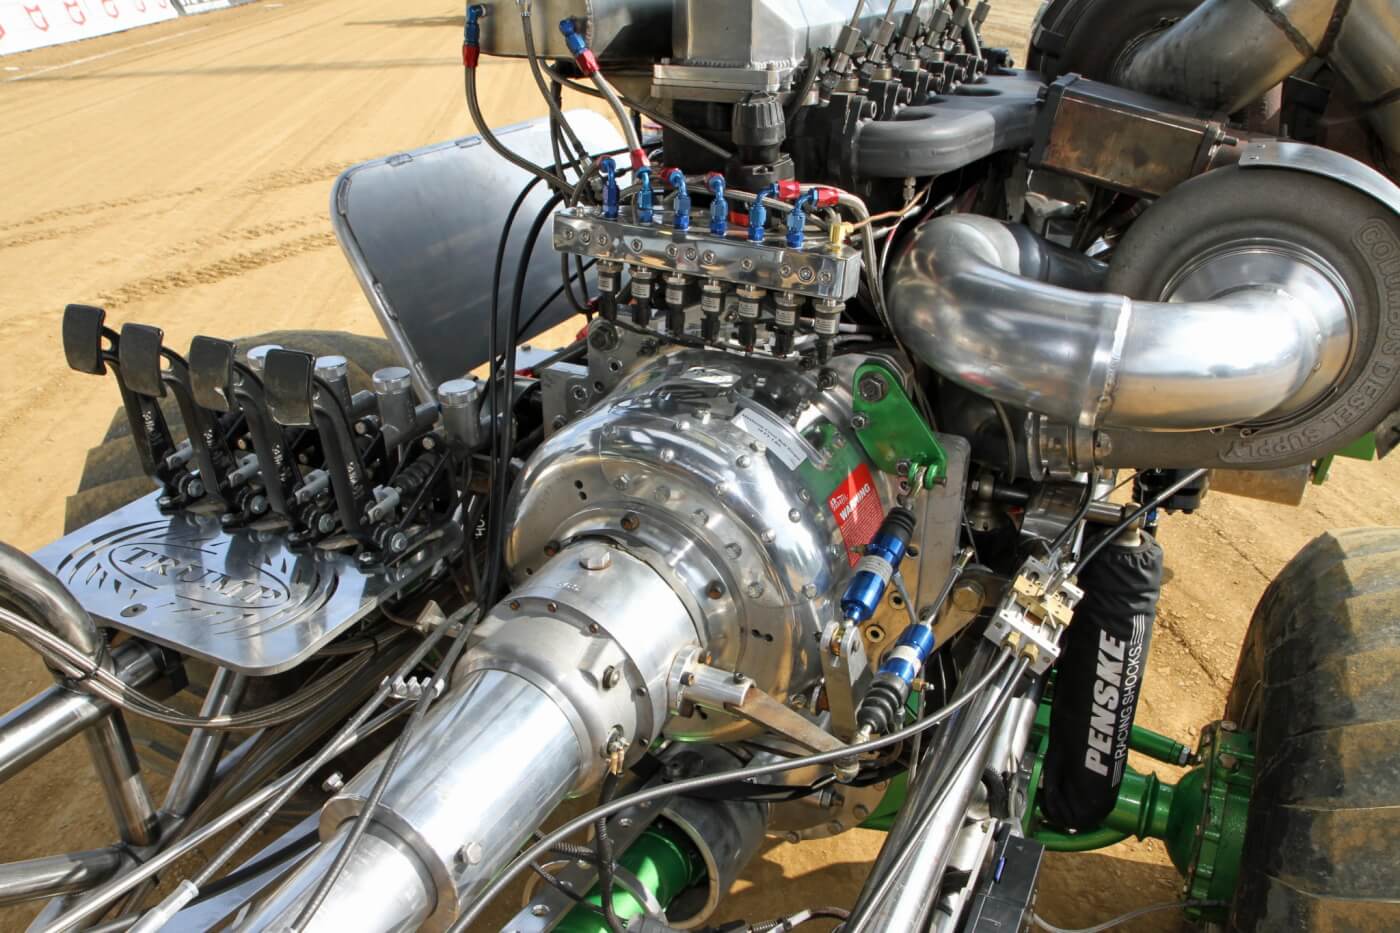 Power from the Cummins engine is channeled through an MRP 4-disc clutch housed within ProBell bellhousing. To make it possible to back the truck up to the sled, Kellogg relies on an SCS Gearbox reverser connected directly to the bell housing. You can also see the array of pedals he uses for the truck to control left and right independent front braking as well as the clutch and reverser.